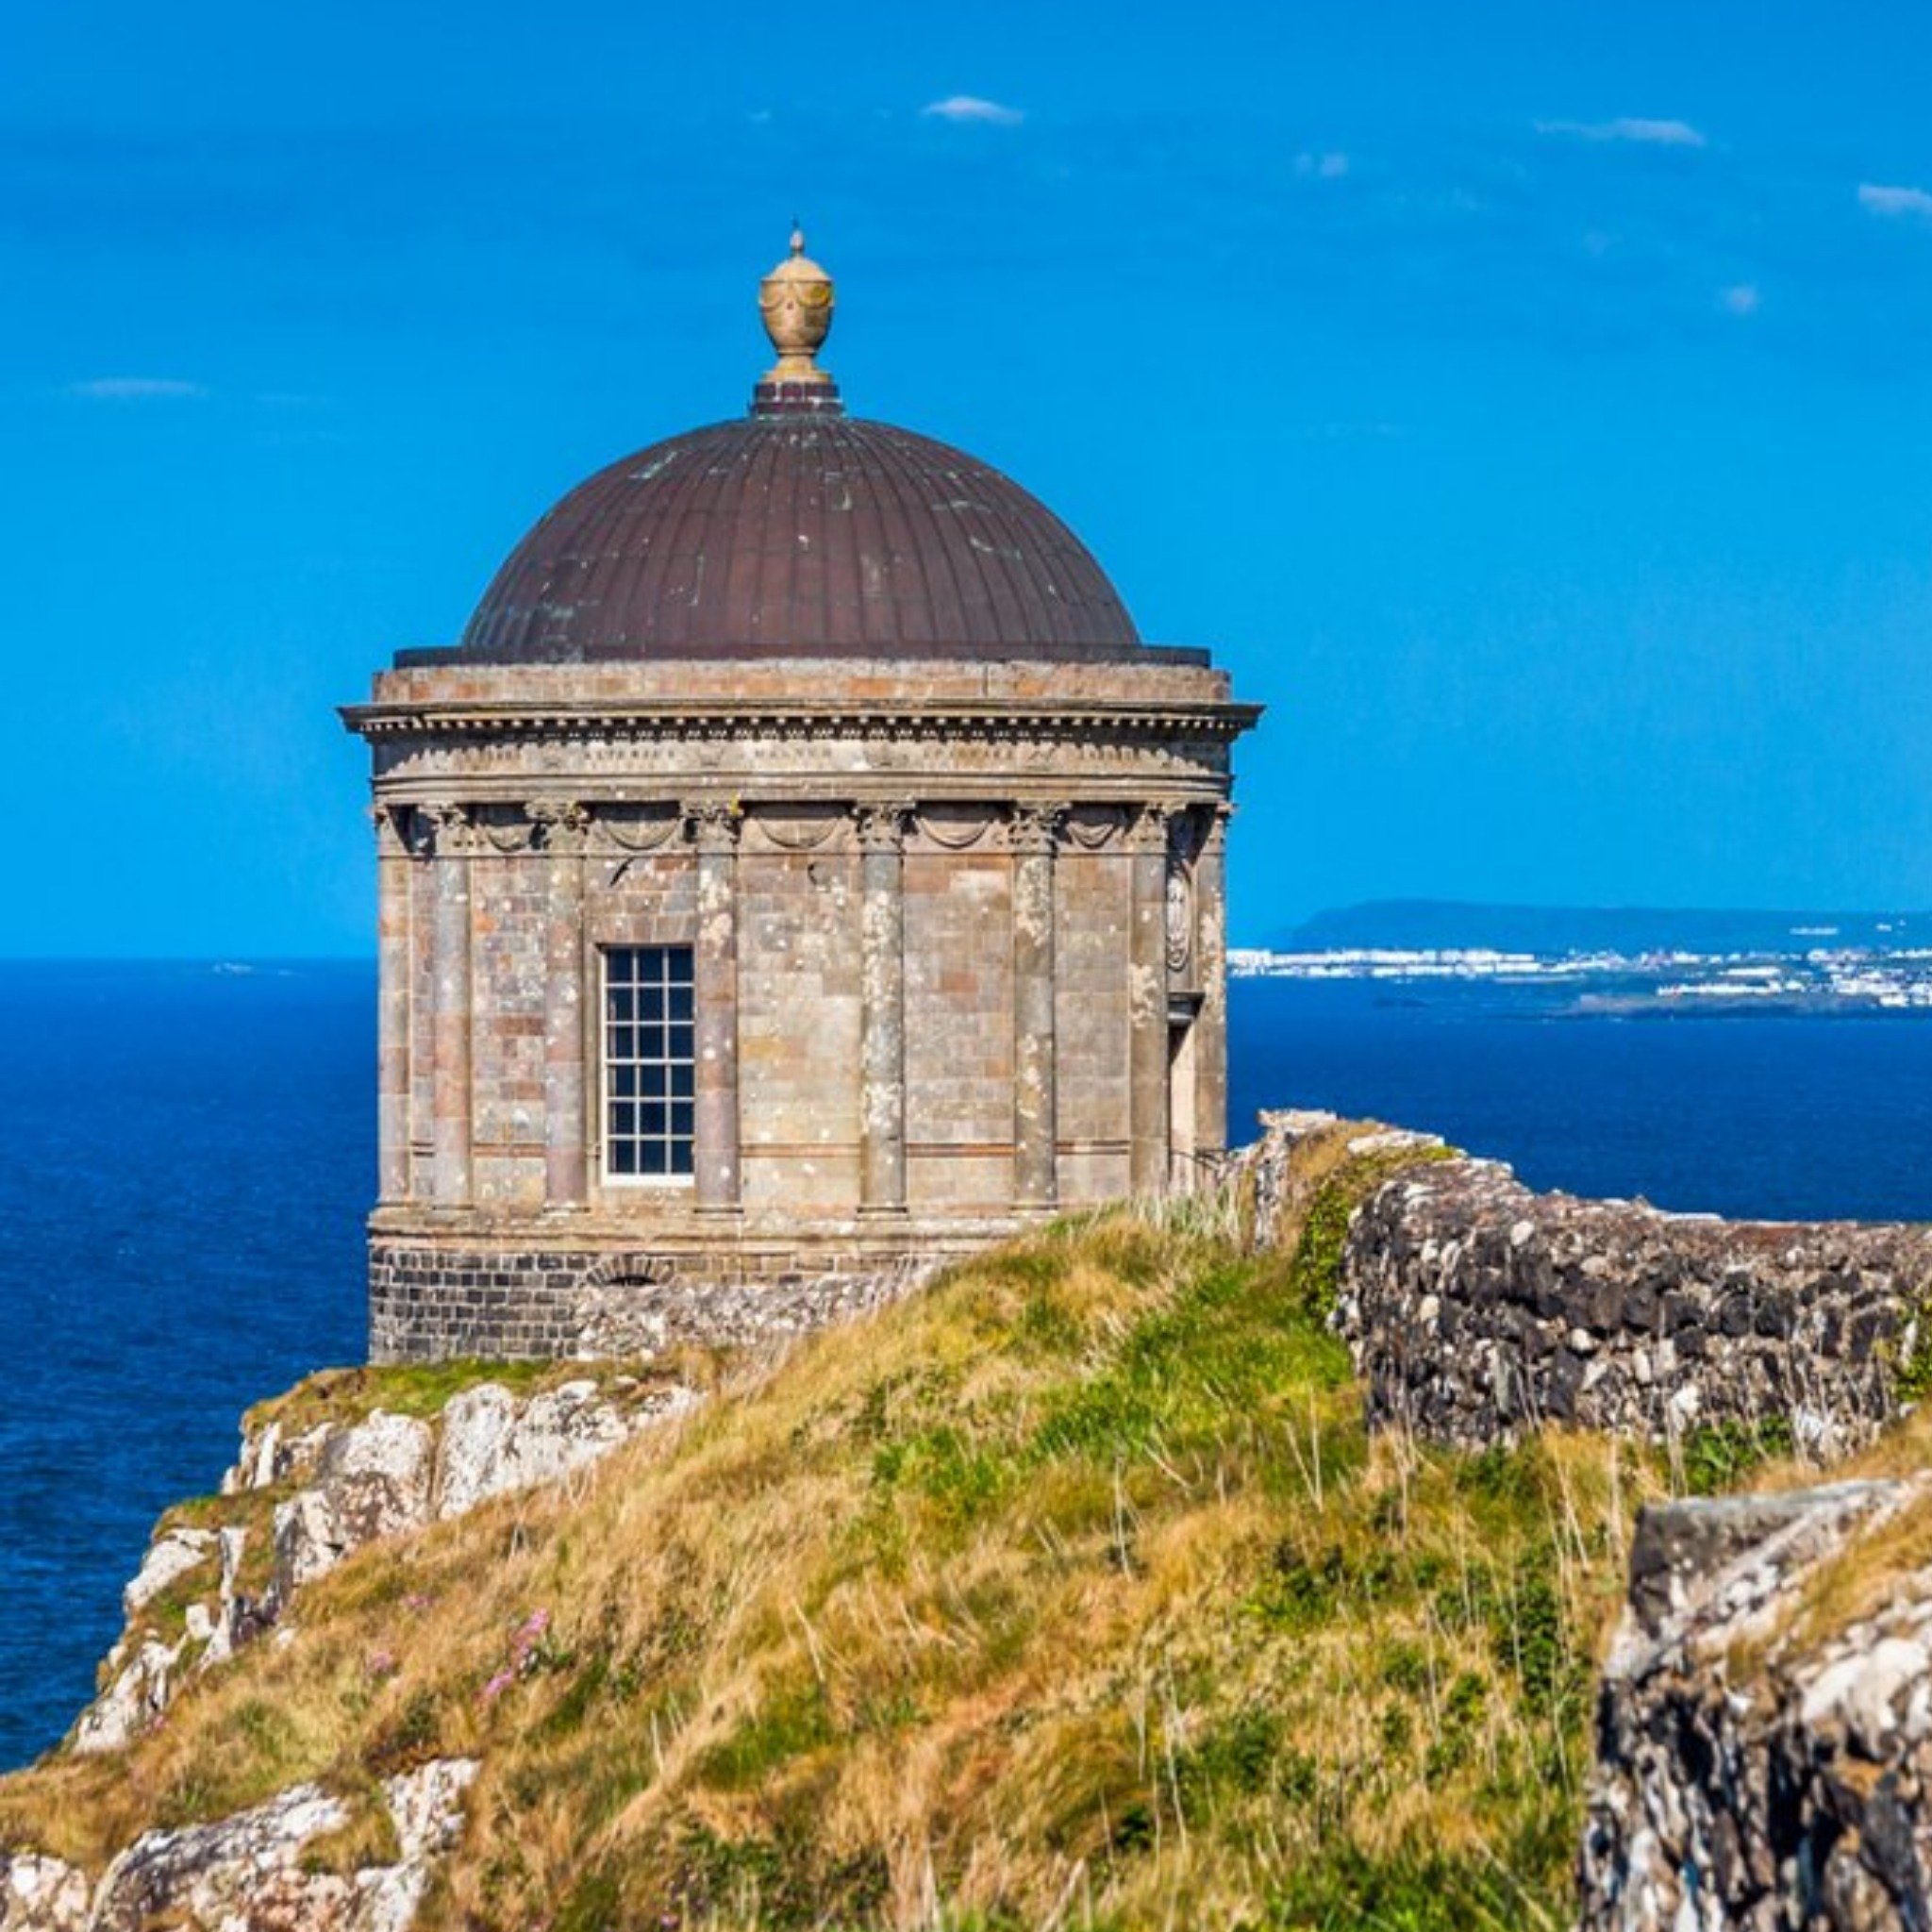 Moonpig Photographic The Mussenden Temple On The Cliffs Above The Atlantic Ocean, Square Card